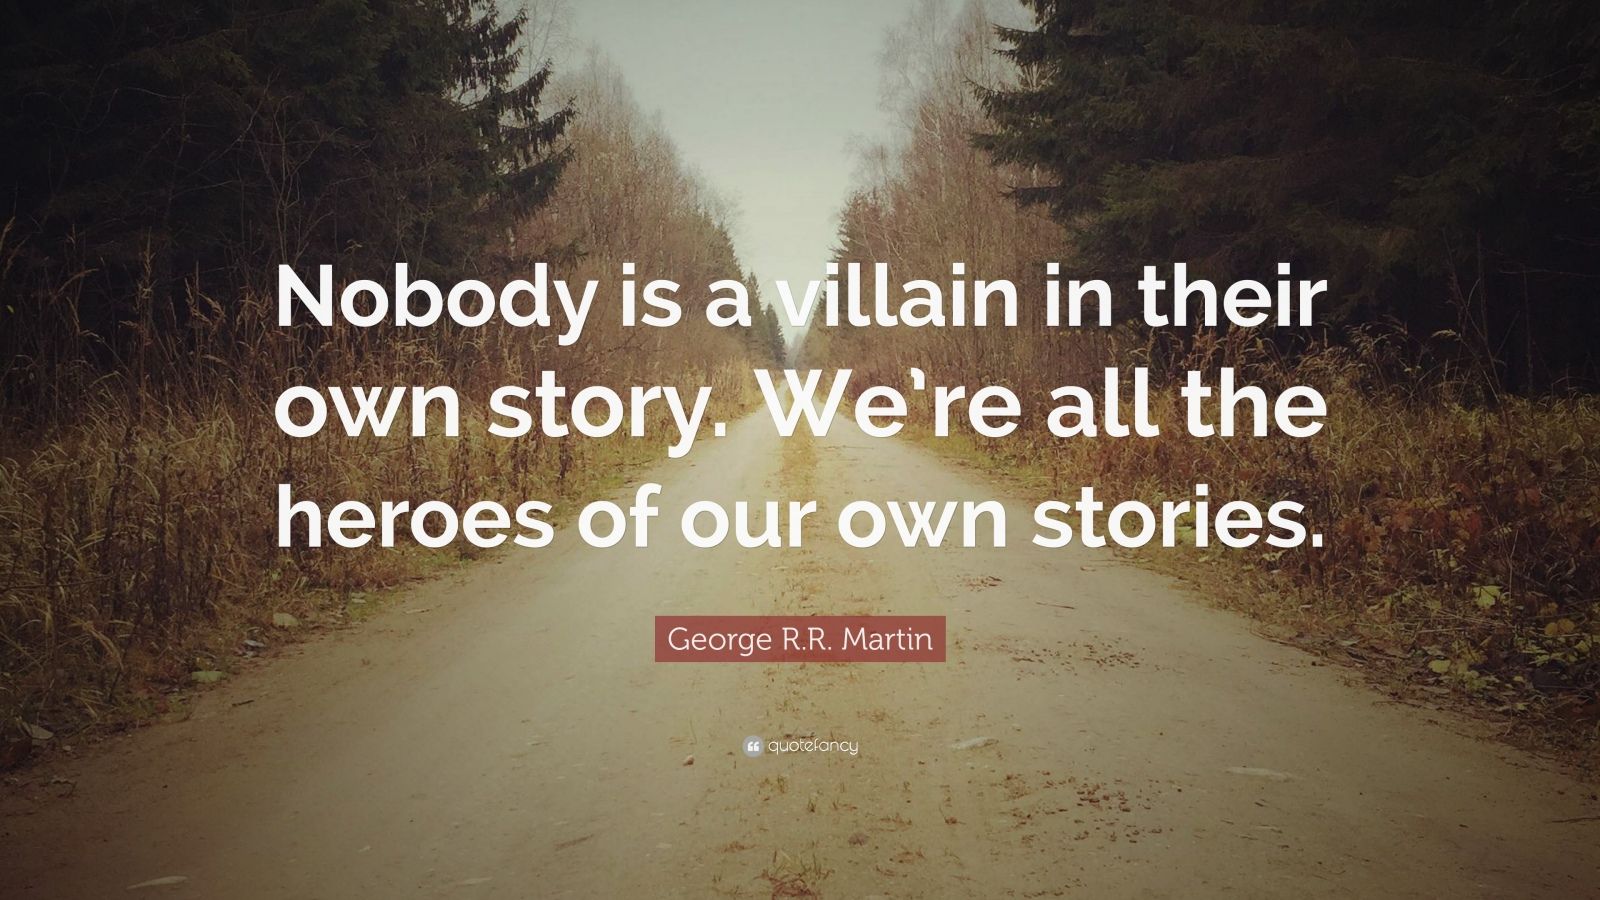 George R.R. Martin Quote: “Nobody is a villain in their own story. We